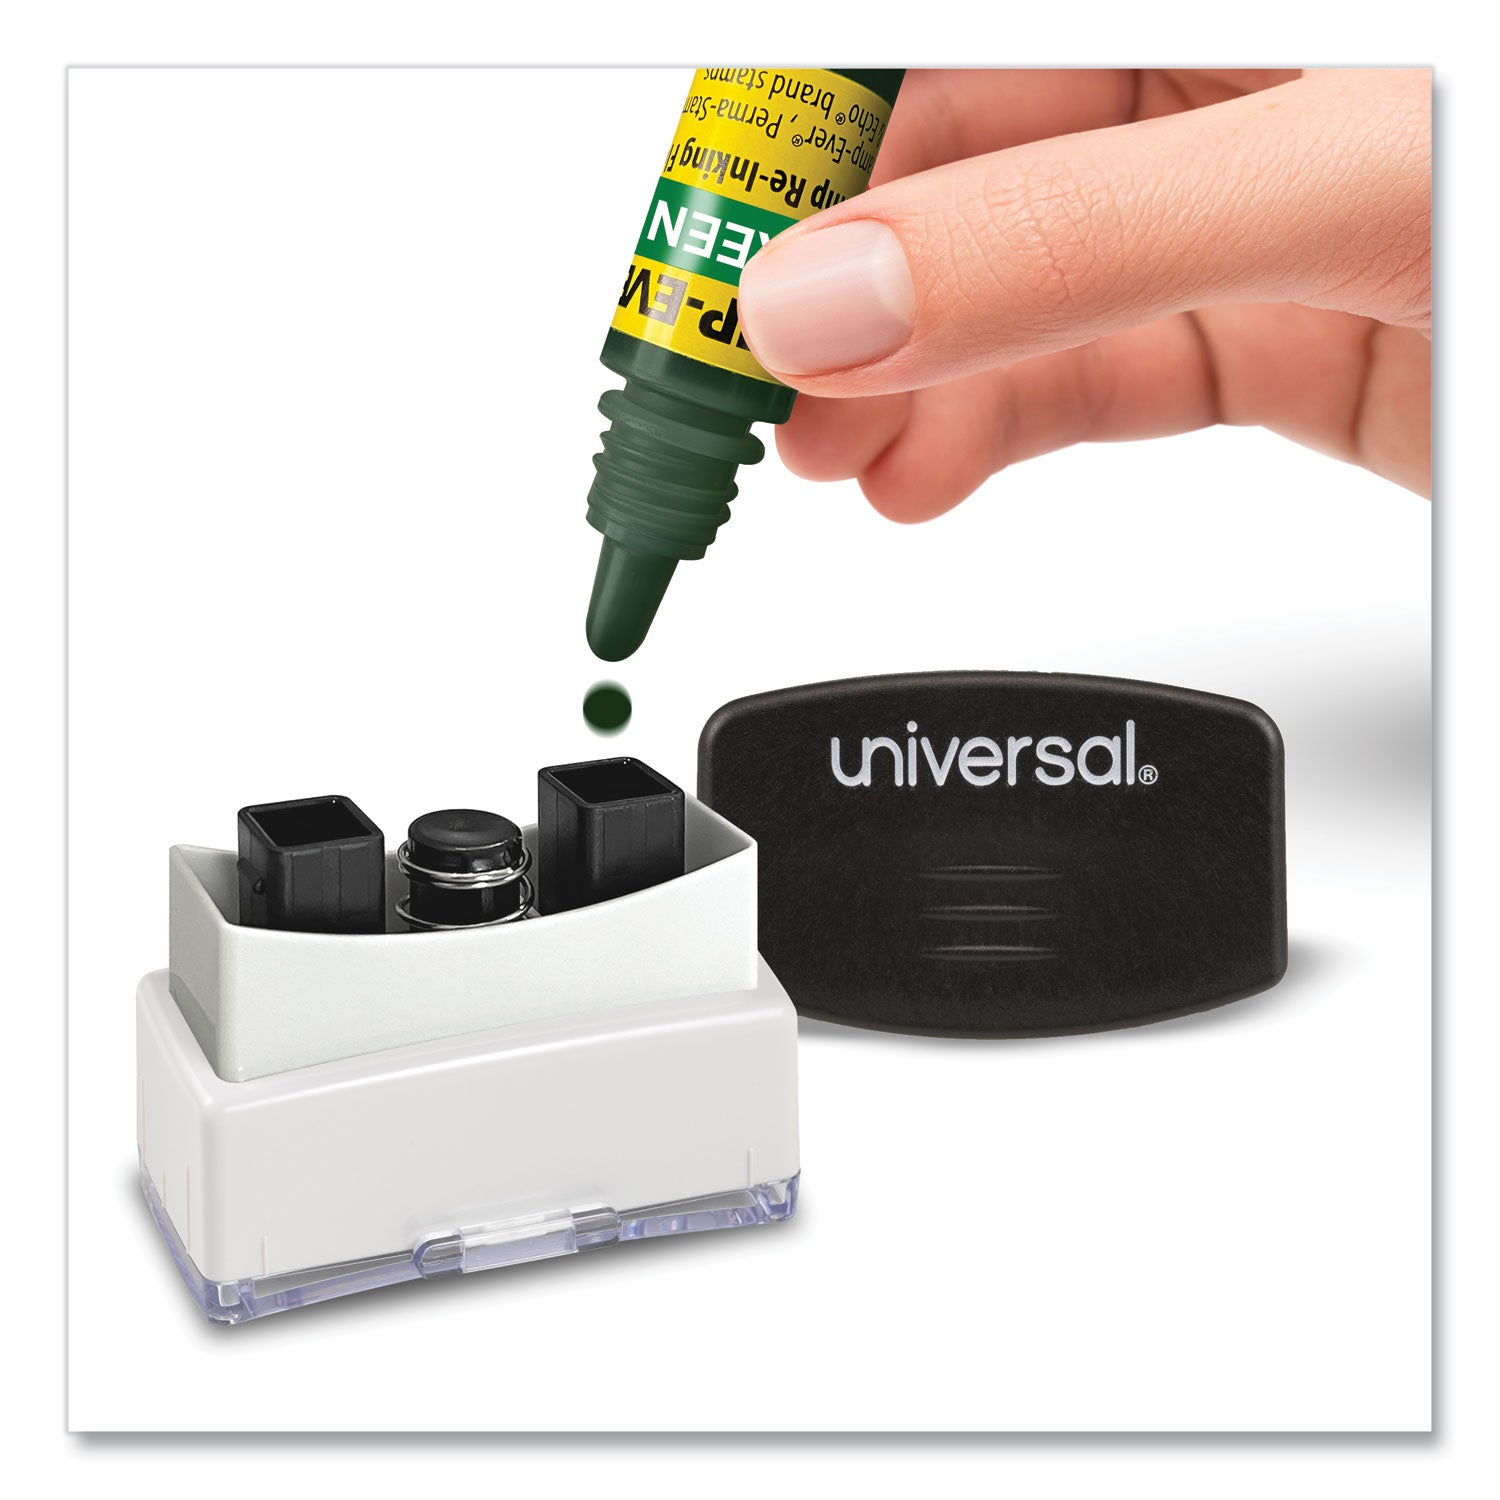 Refill Ink for Clik! and Universal Stamps, 7 mL Bottle, Green - 